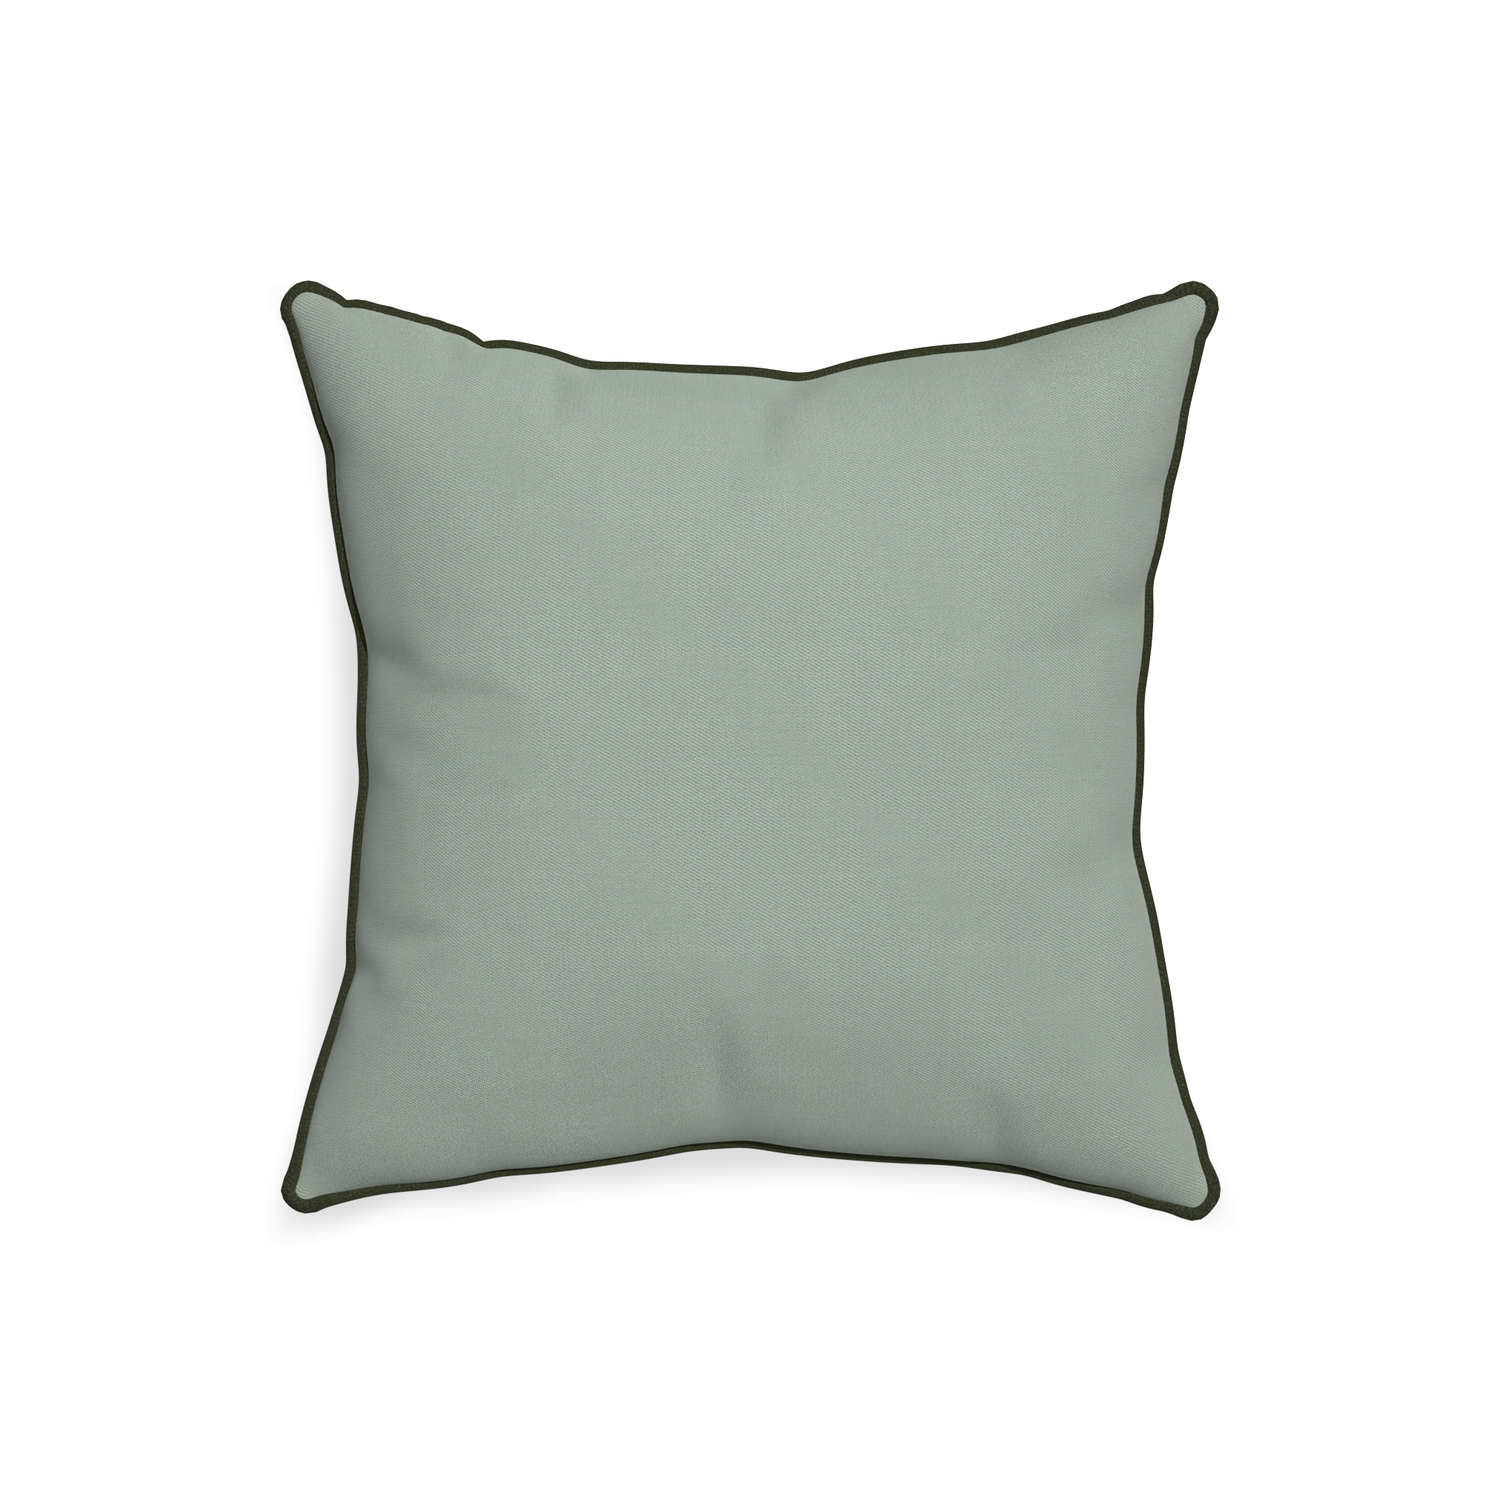 20-square sage custom sage green cottonpillow with f piping on white background